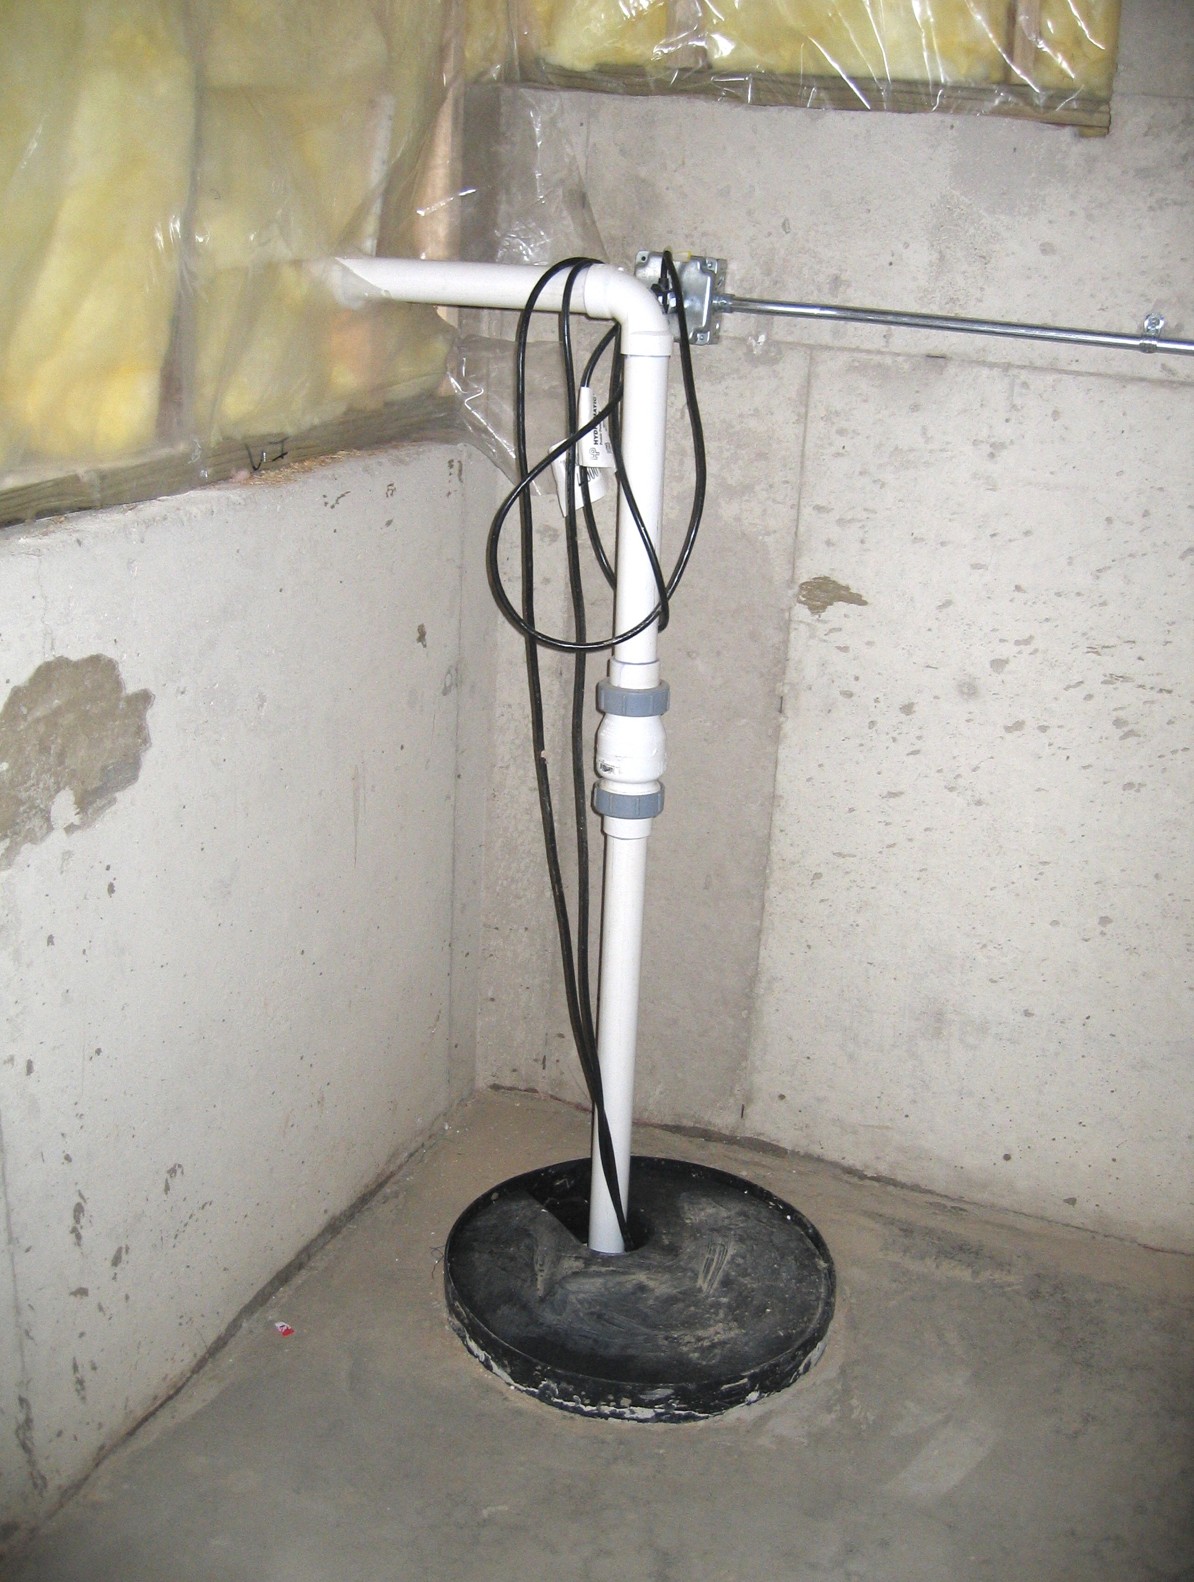 Covering Sump Pumps: Protecting Your Investment